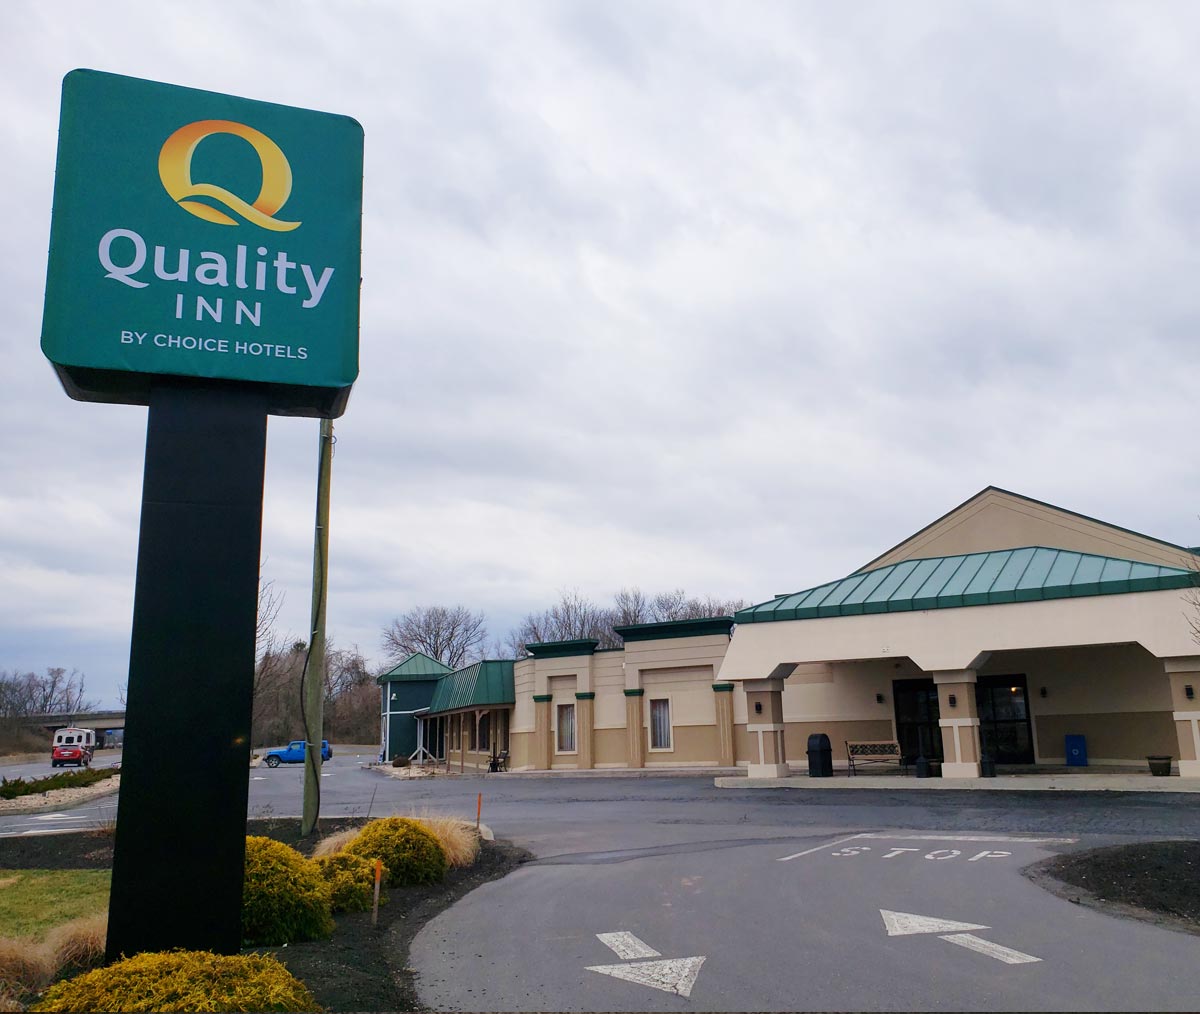 Exterior of the Quality Inn Hotel